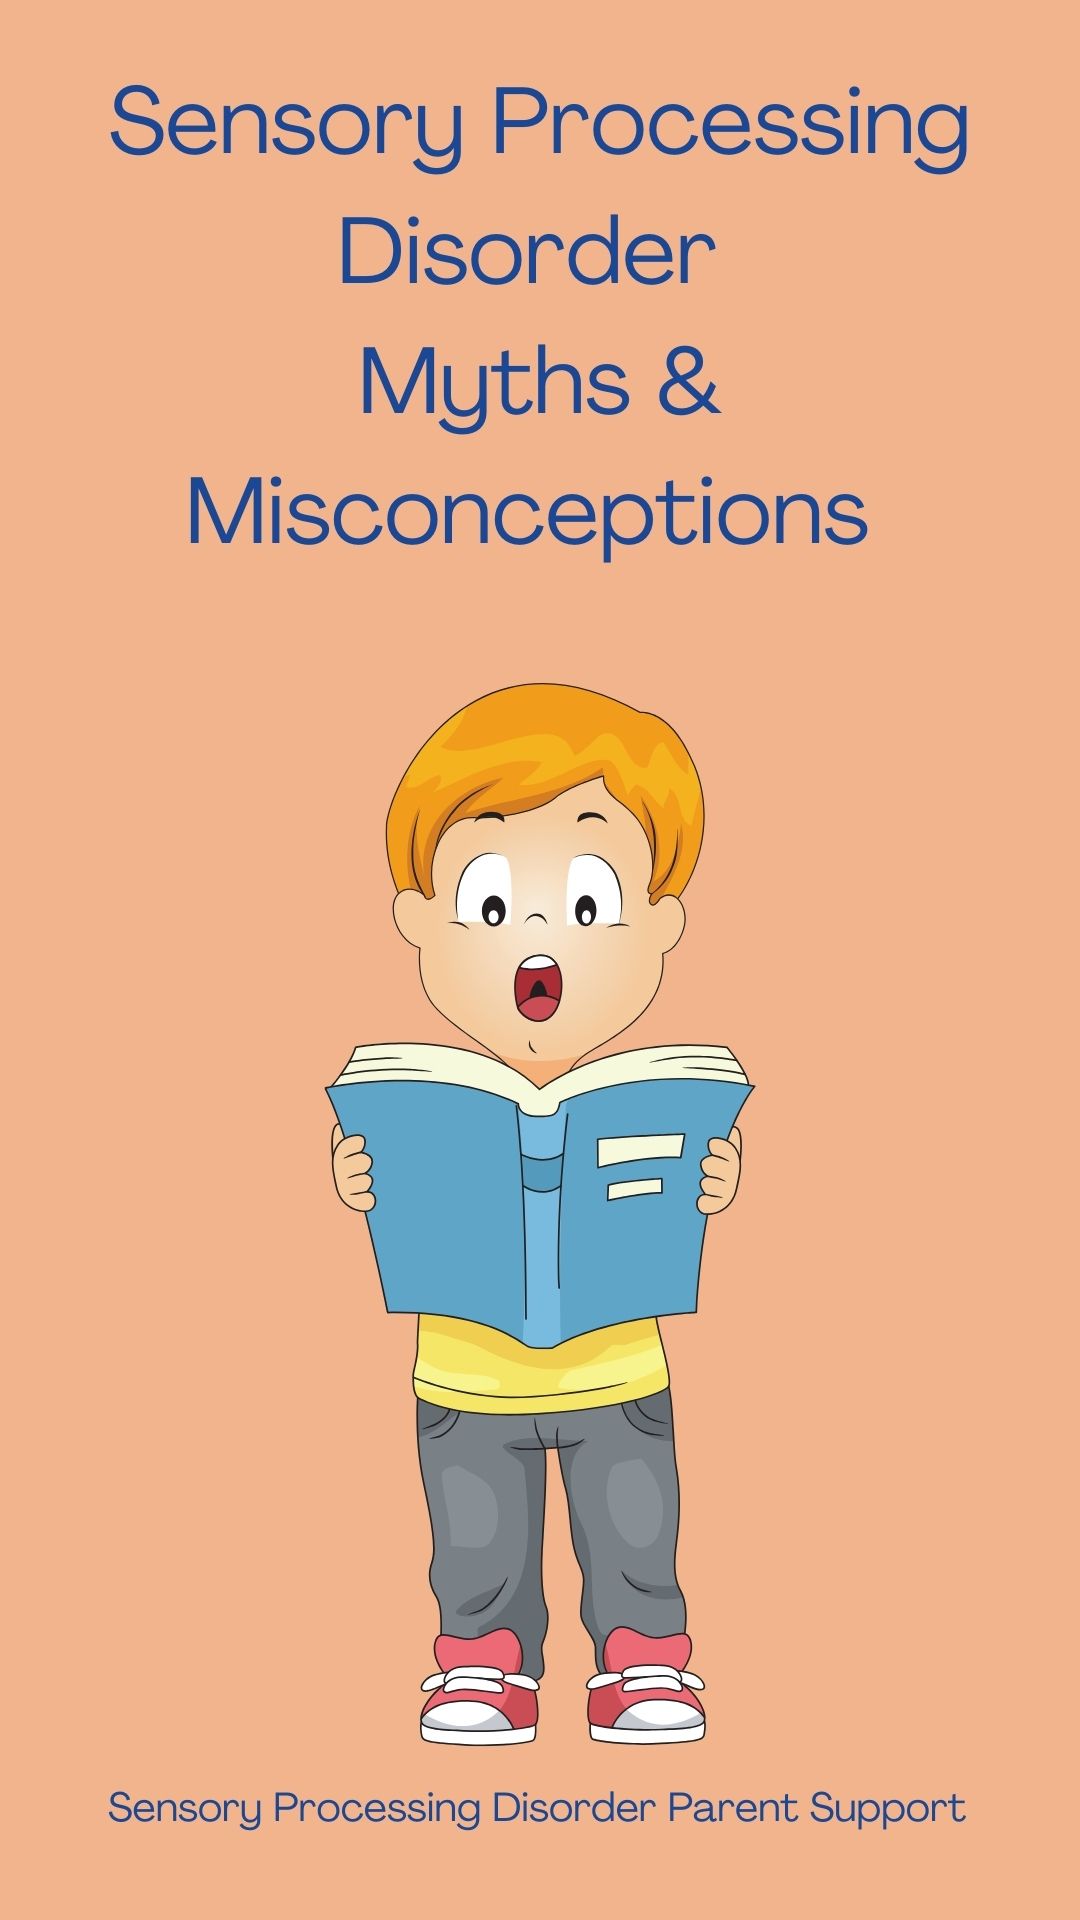 Sensory Processing Disorder Myths & Misconceptions